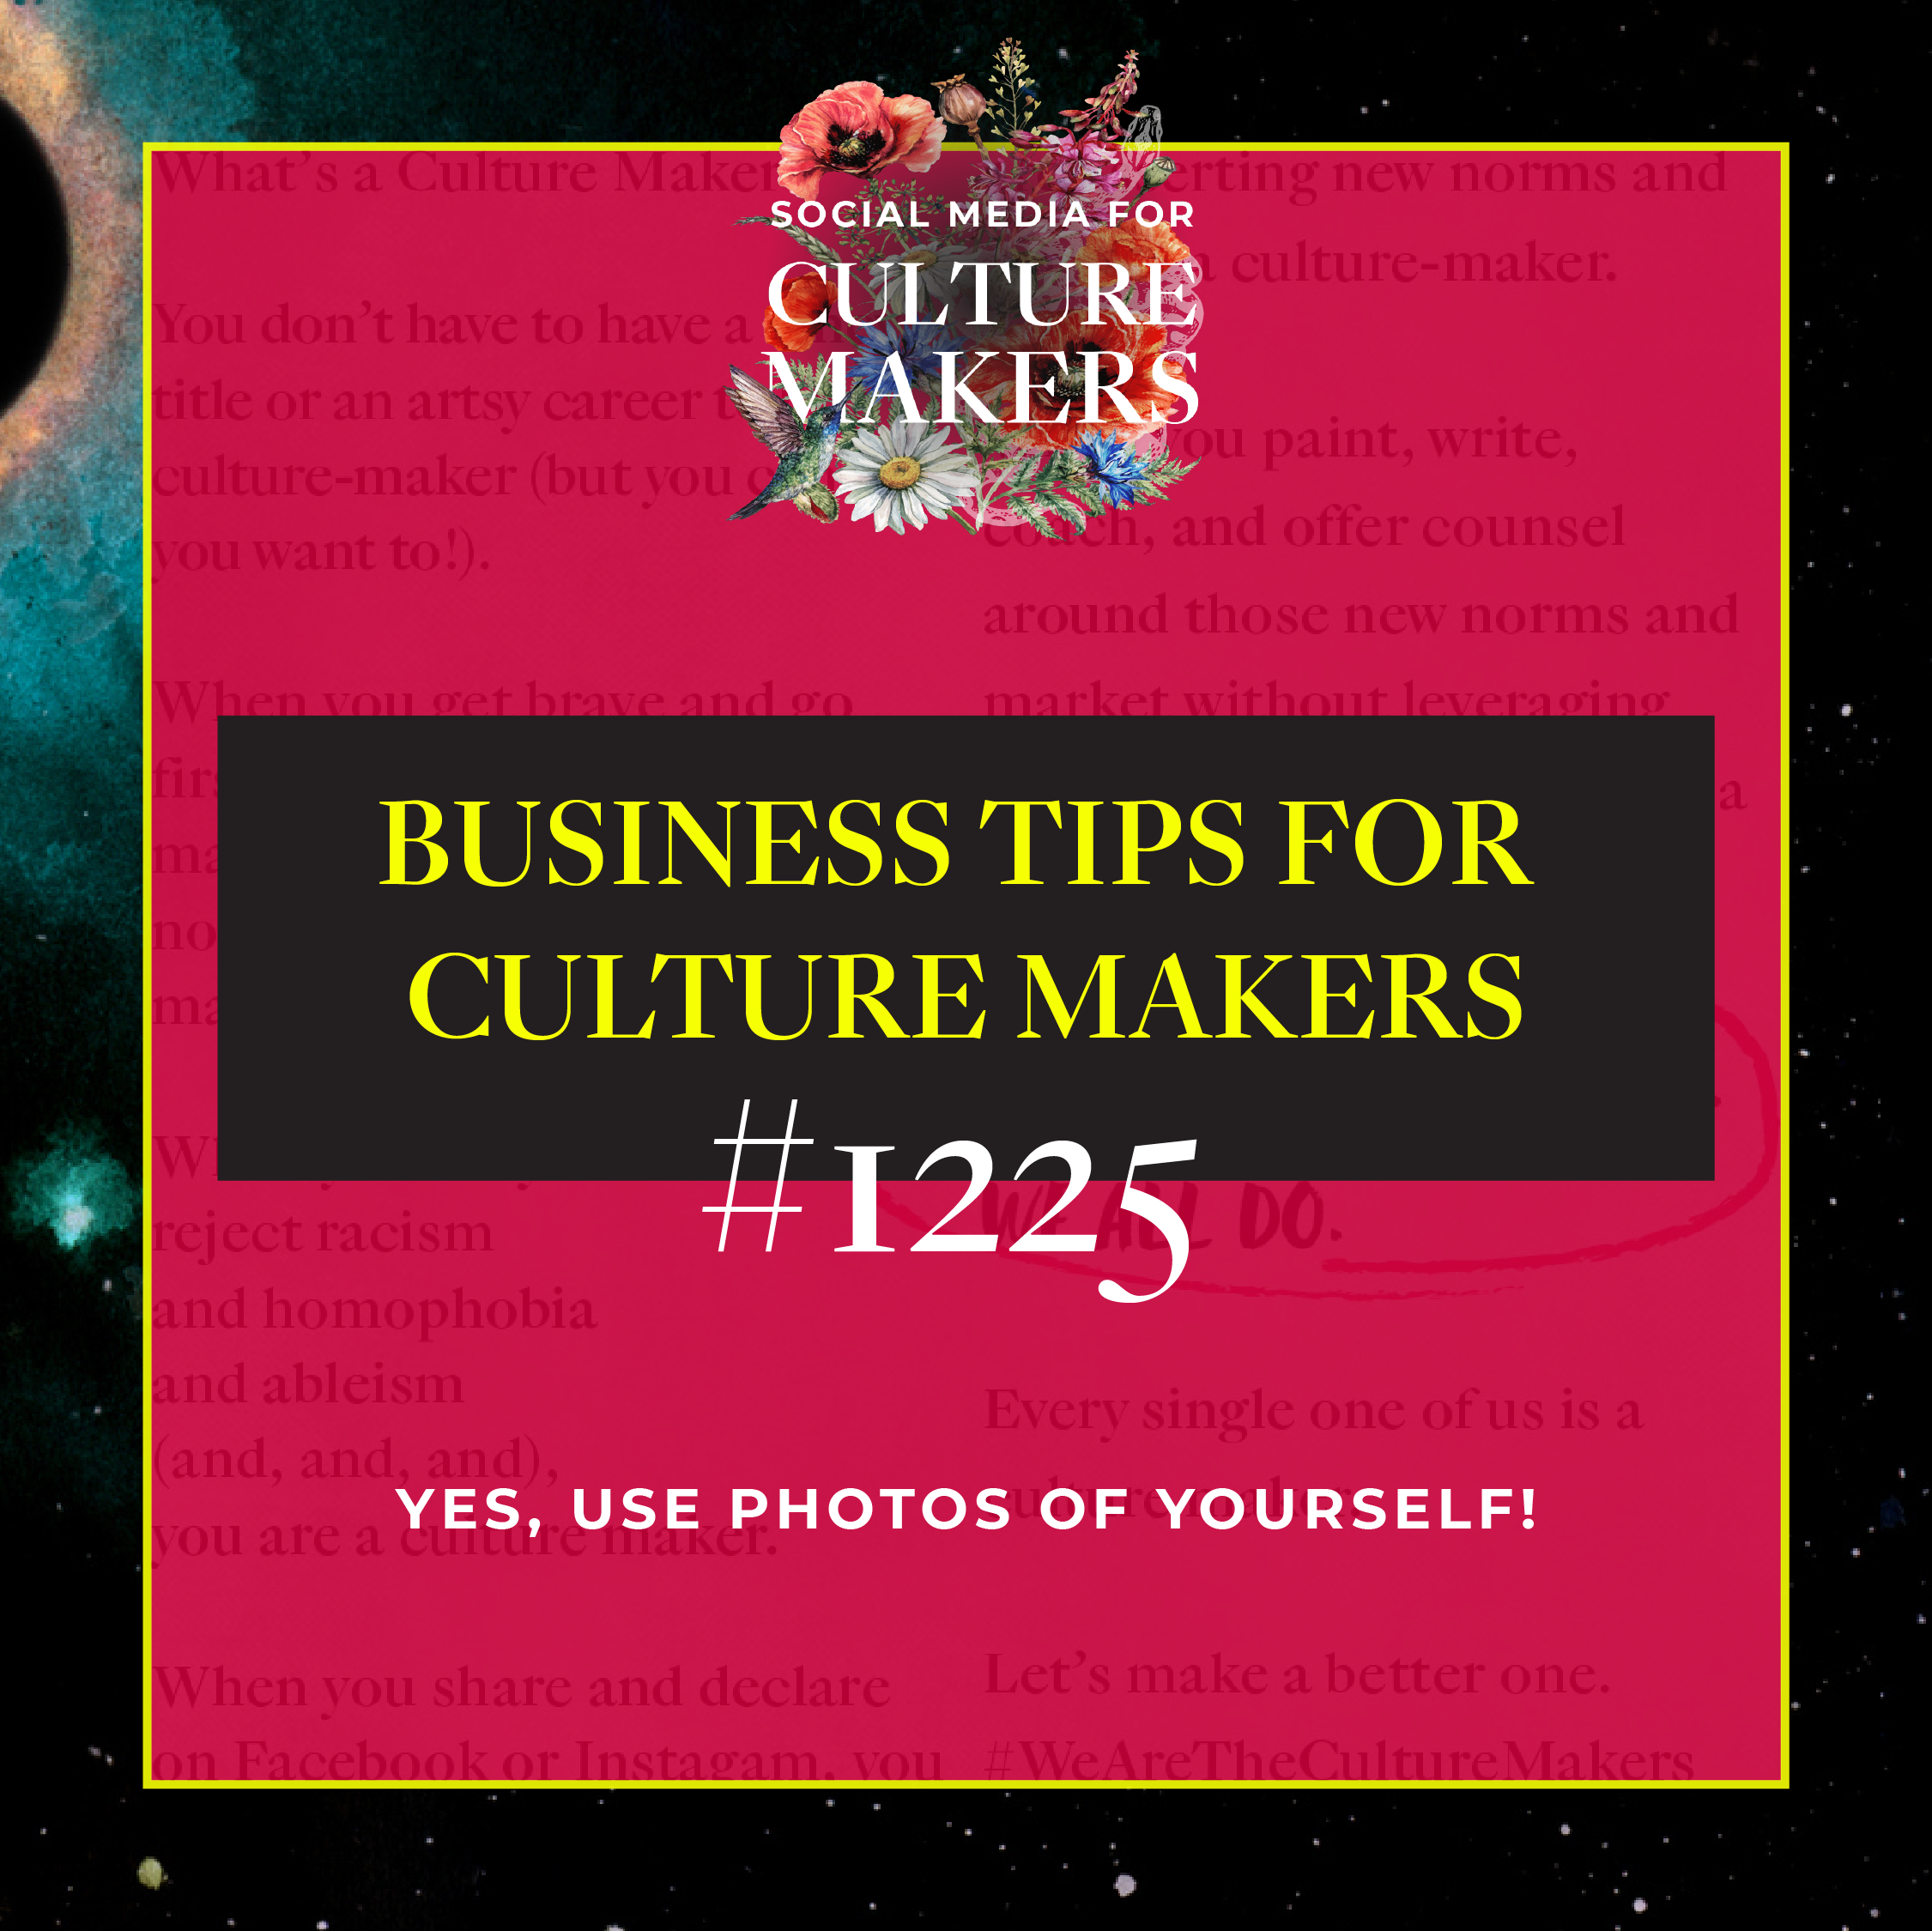 business tips for culture makers 1225 yes use selfies